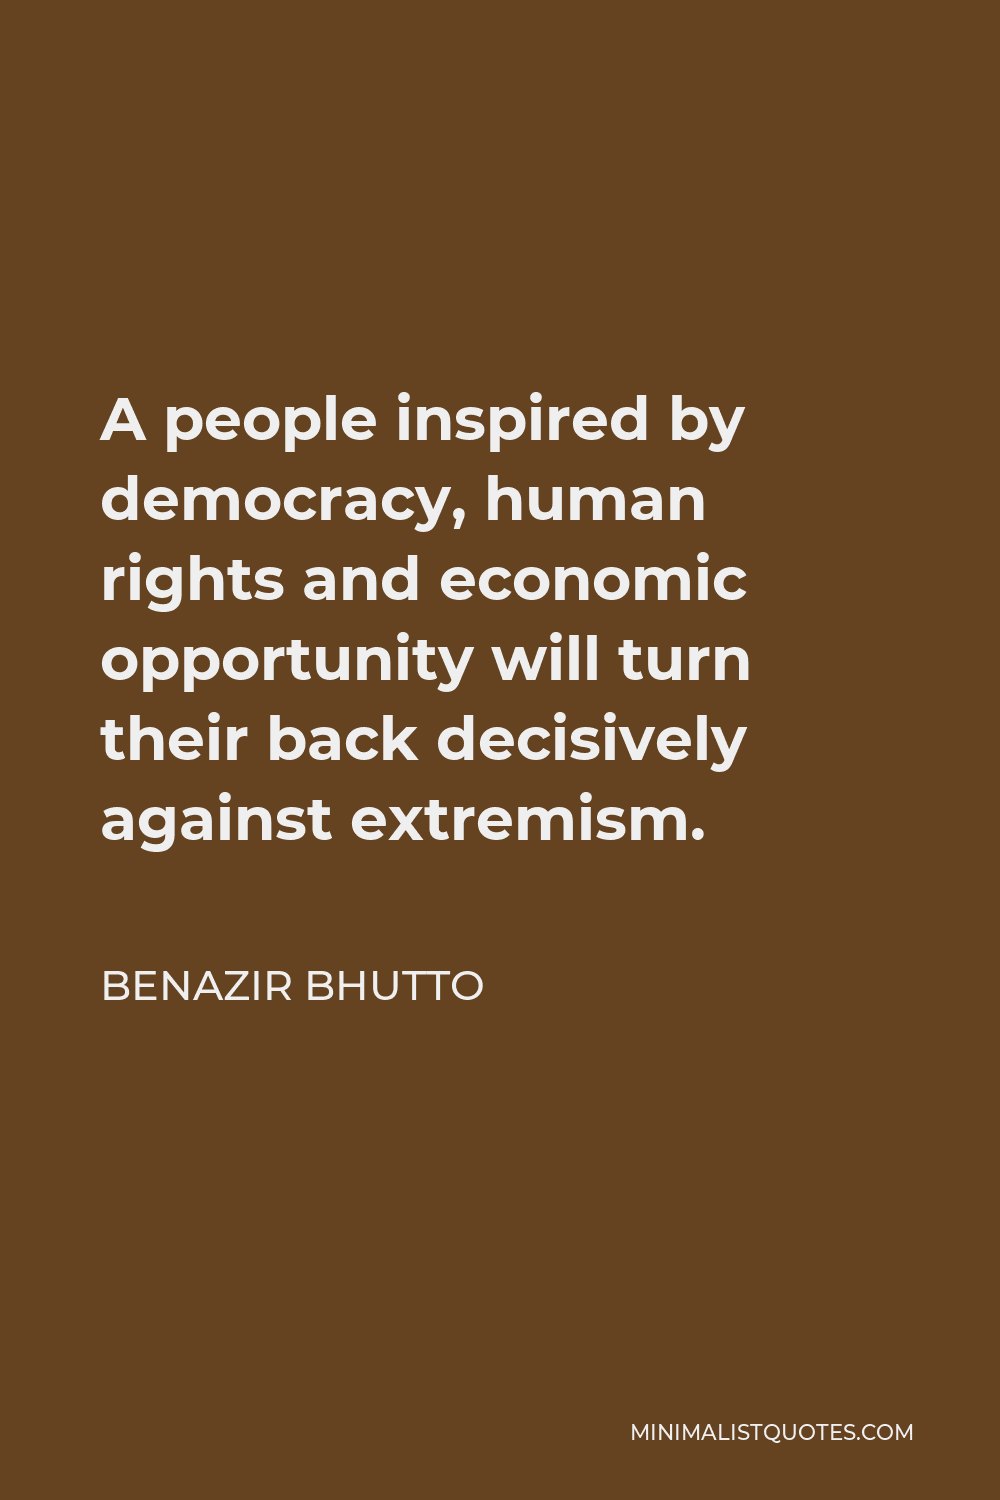 Benazir Bhutto Quote - A people inspired by democracy, human rights and economic opportunity will turn their back decisively against extremism.